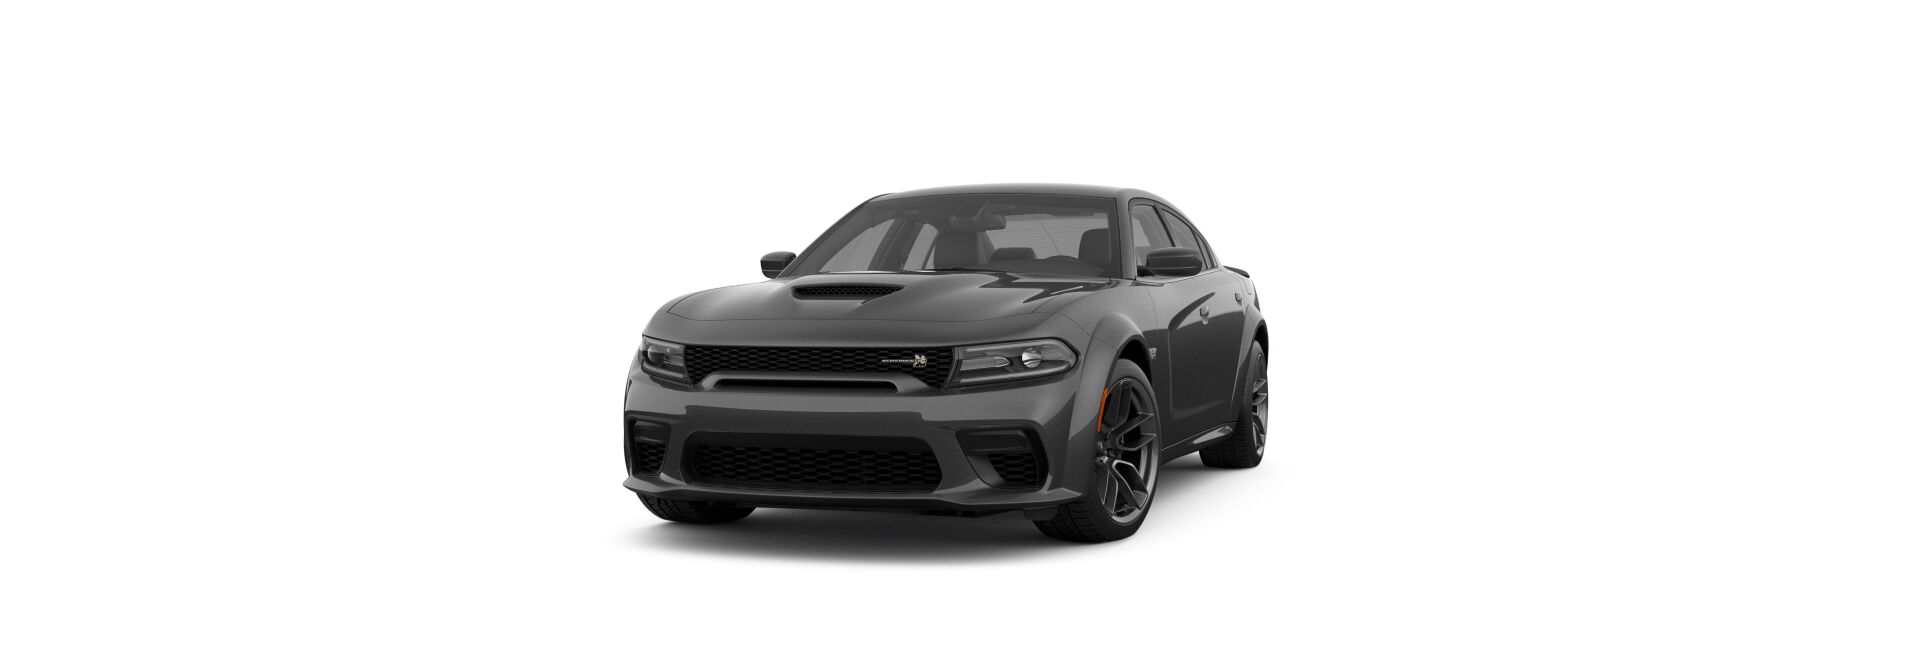 Dodge Charger  Scat pack 392 widebody 2021